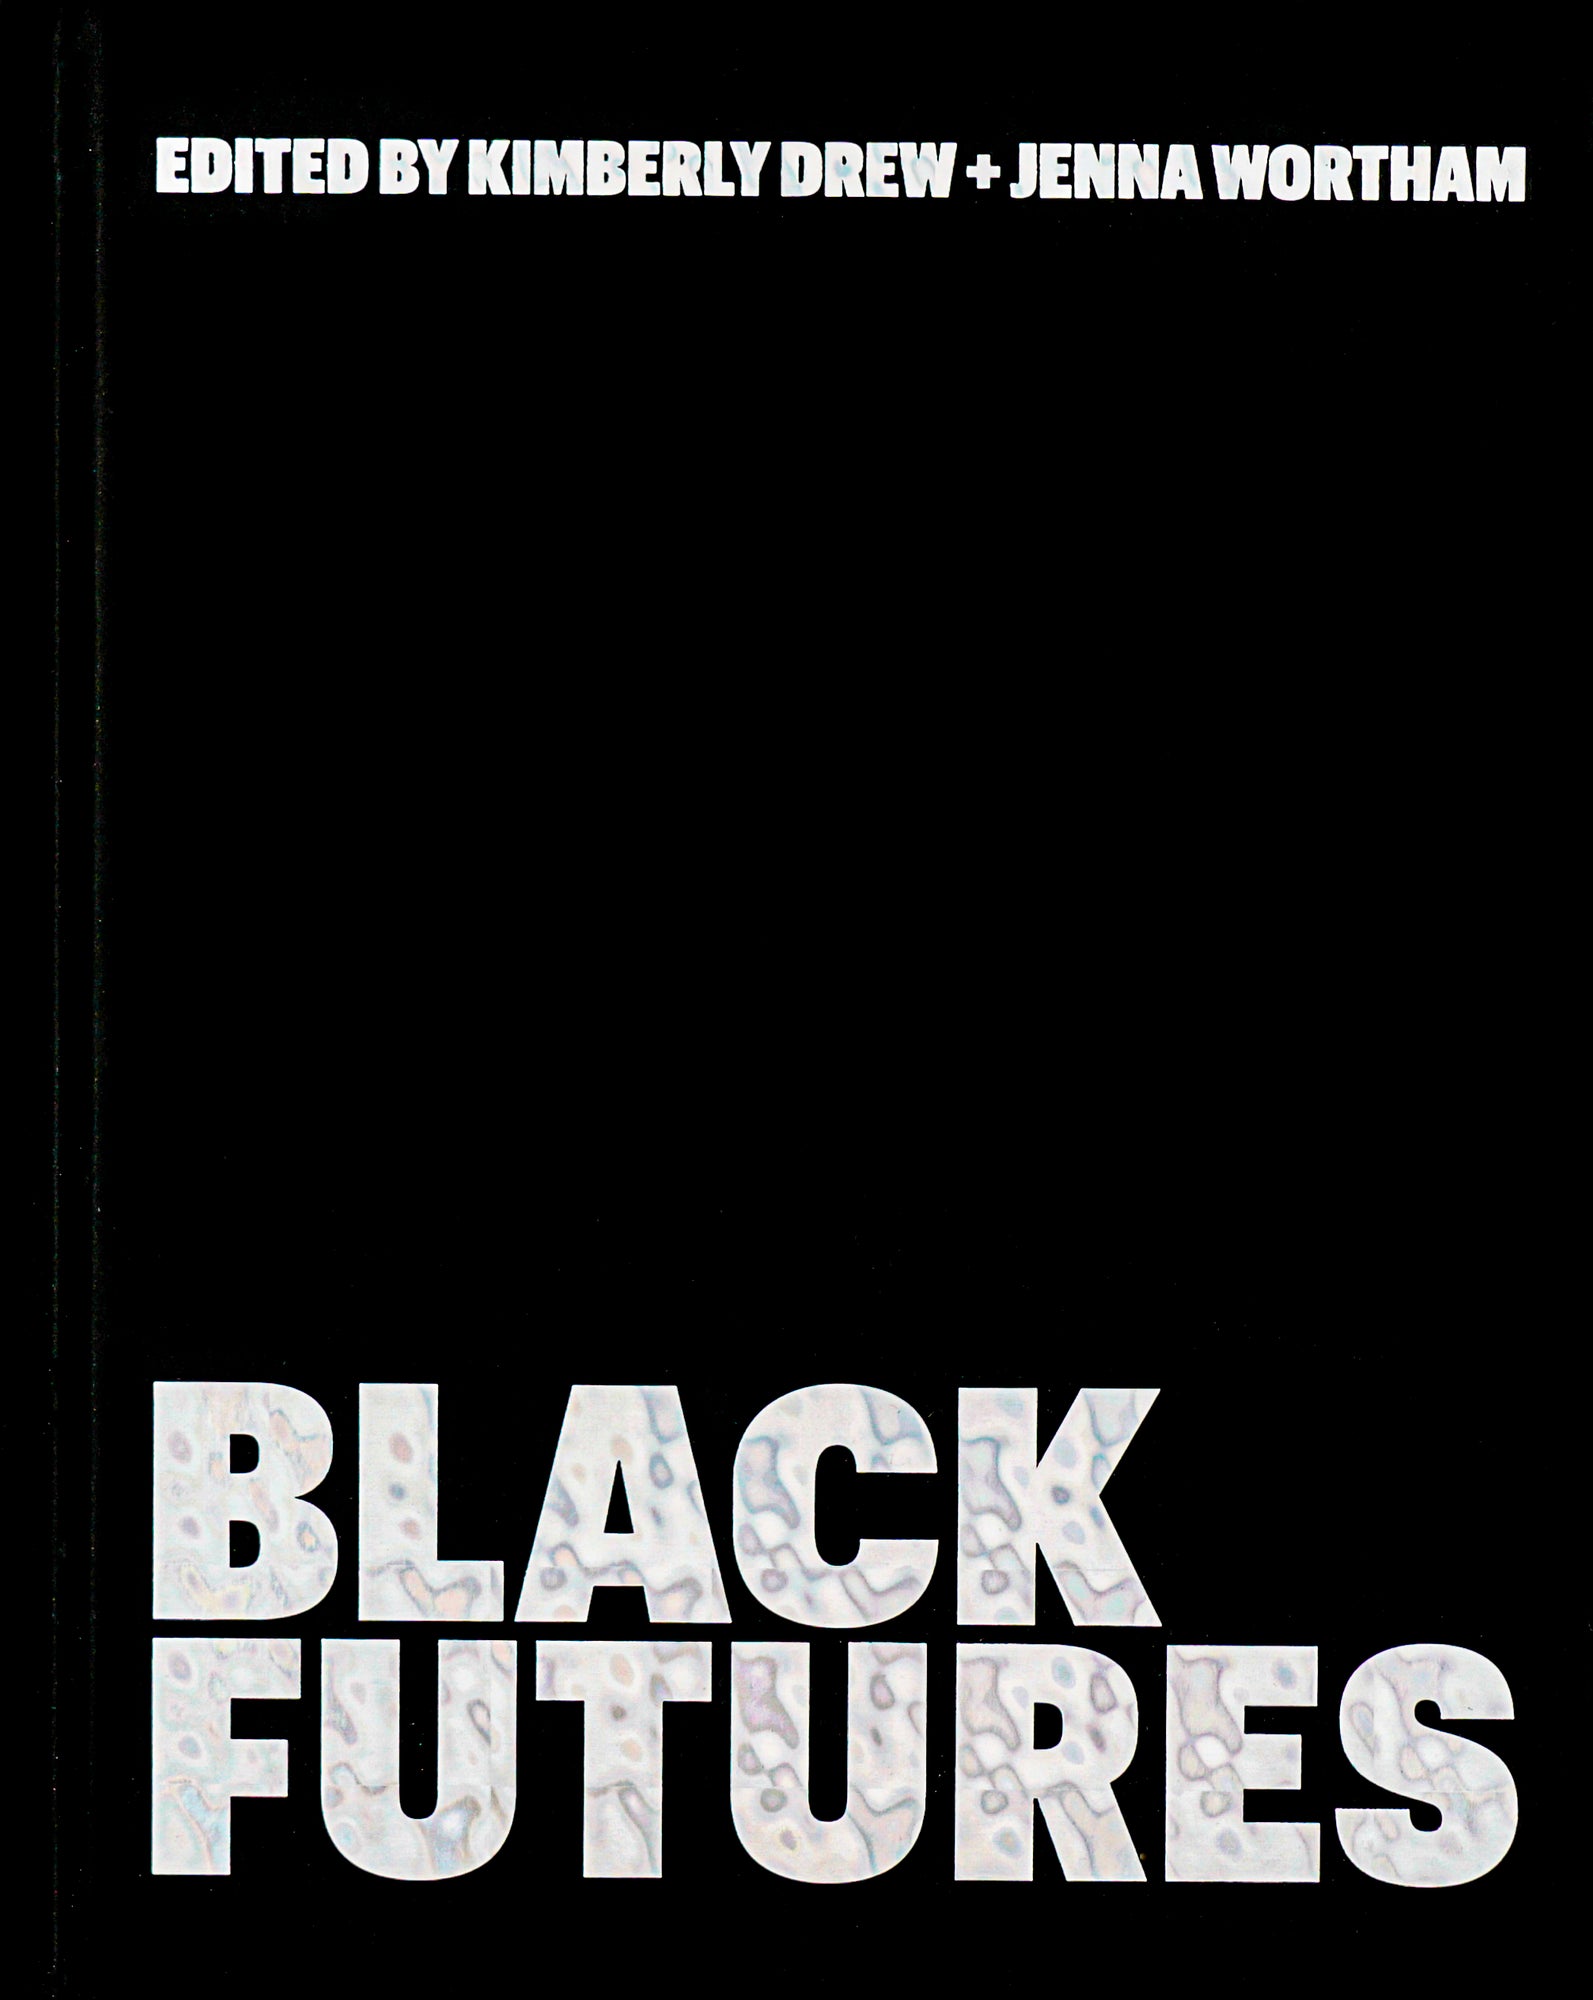 Book cover: Edited Kimberly Drew + Jenna Wortham Black Futures in holographic sans serif type on a black backdrop